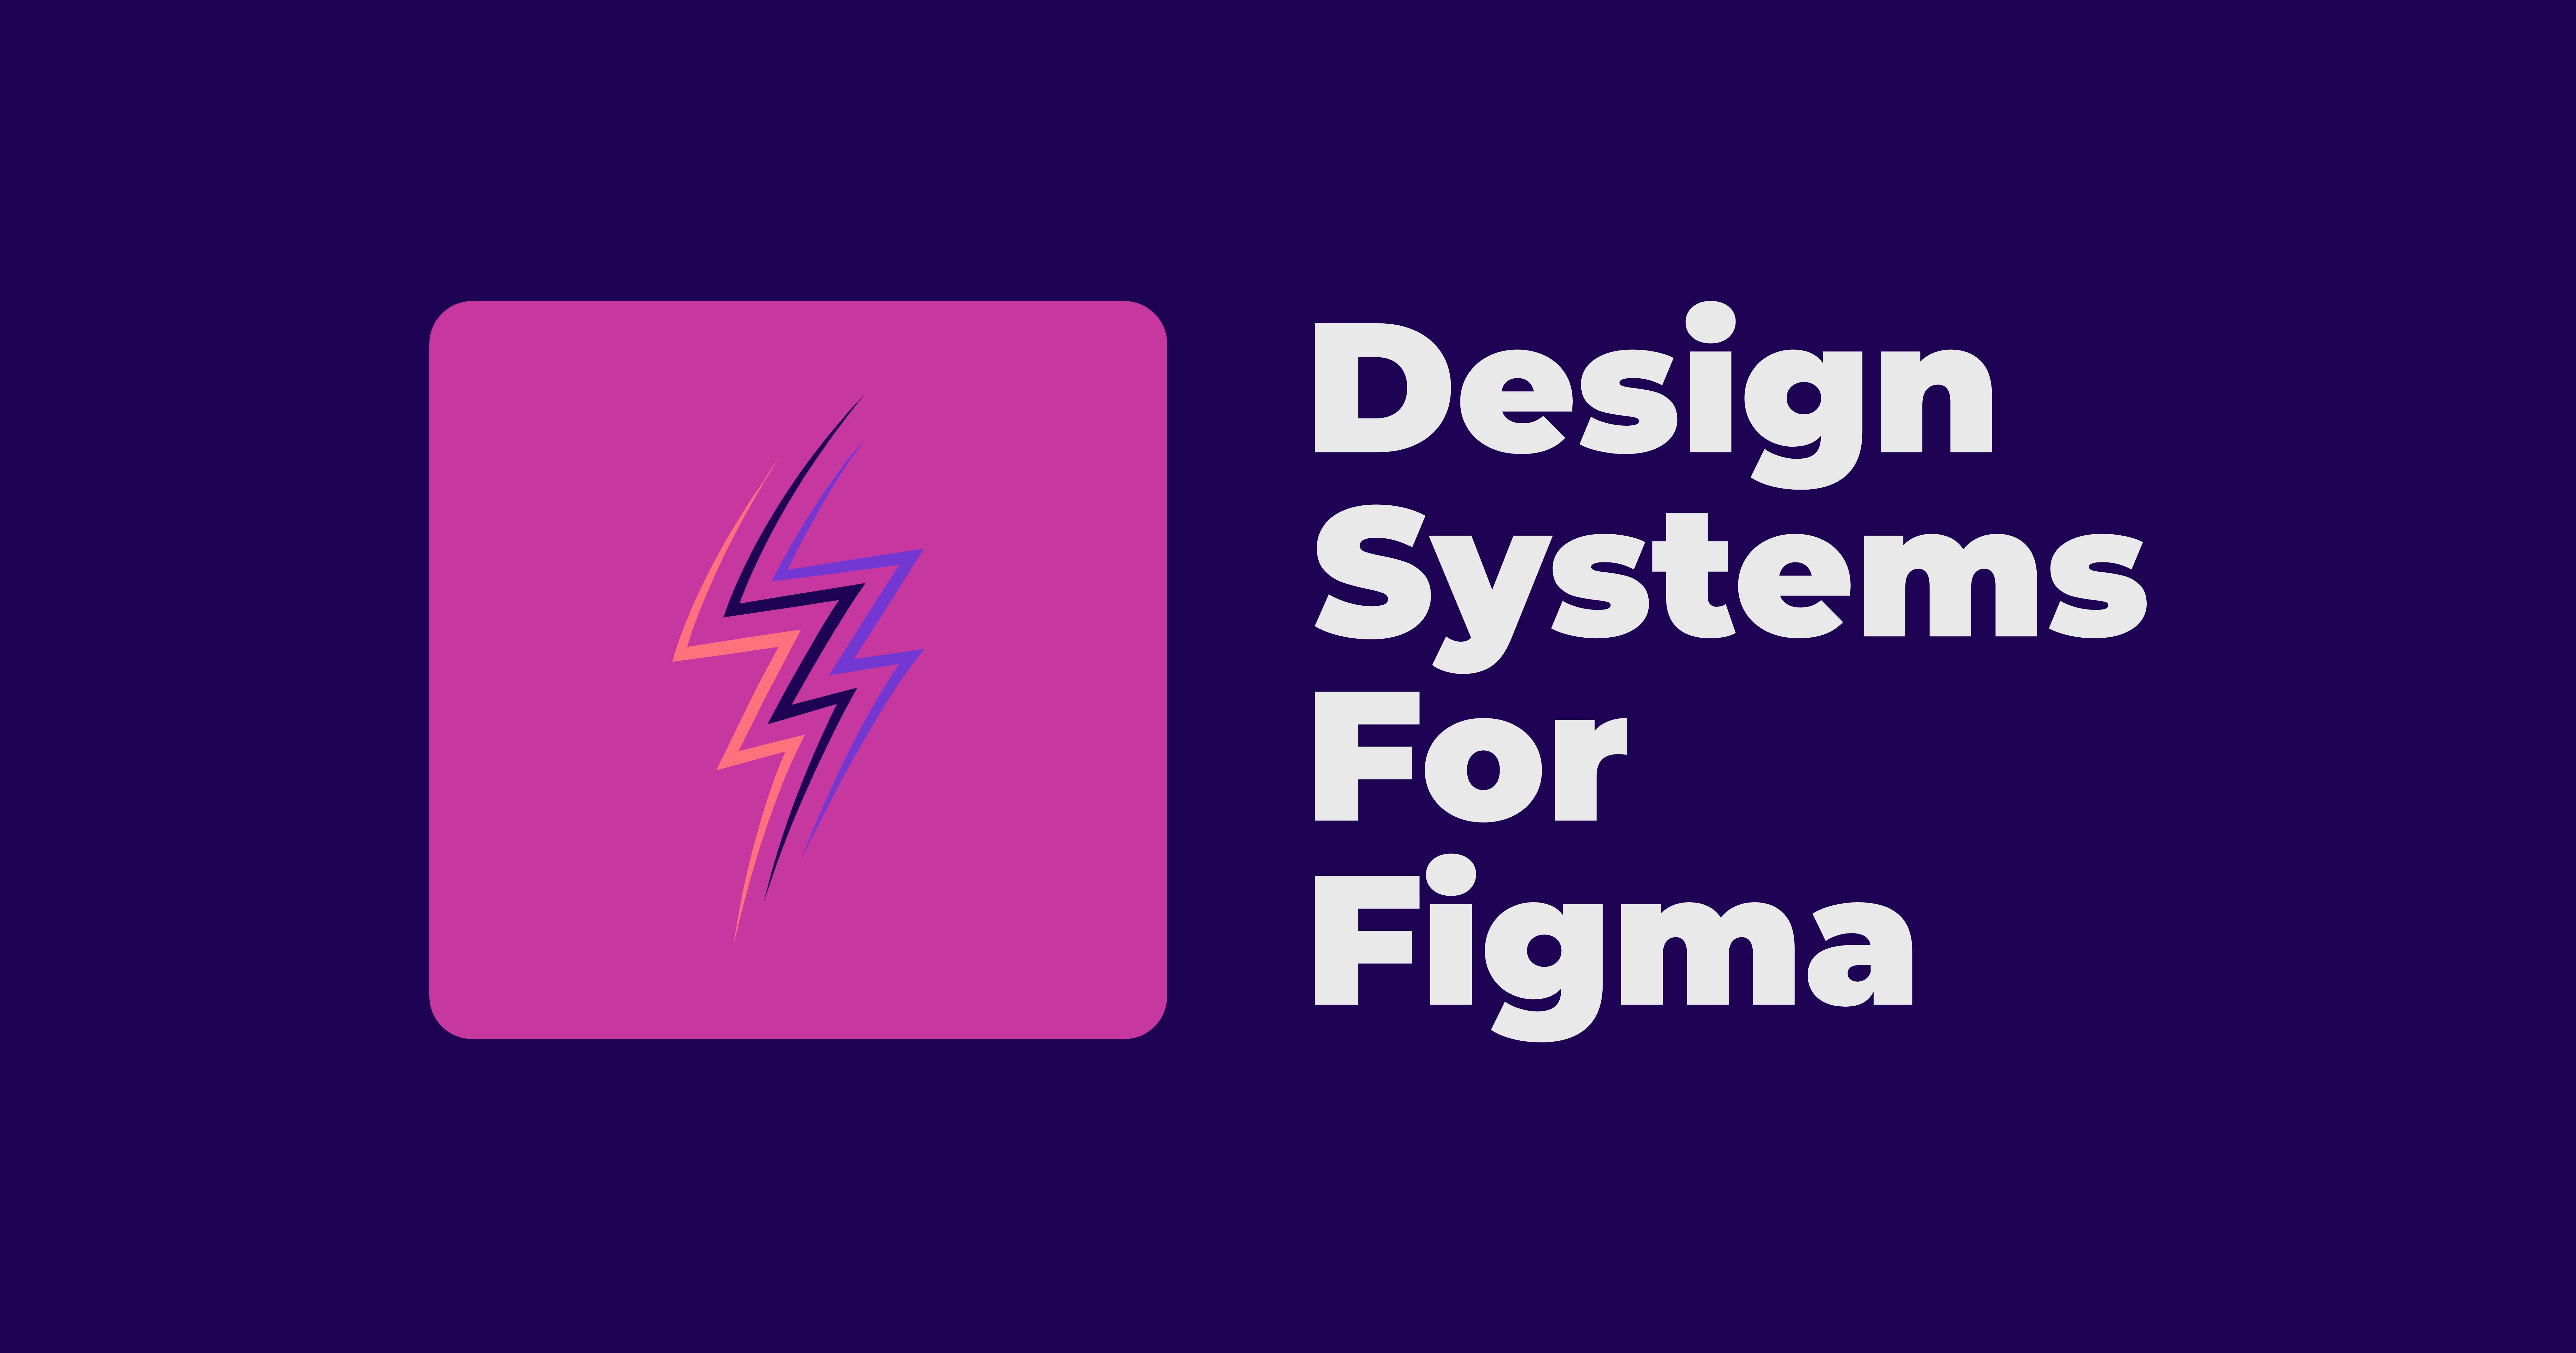 Design Systems For Figma media 1